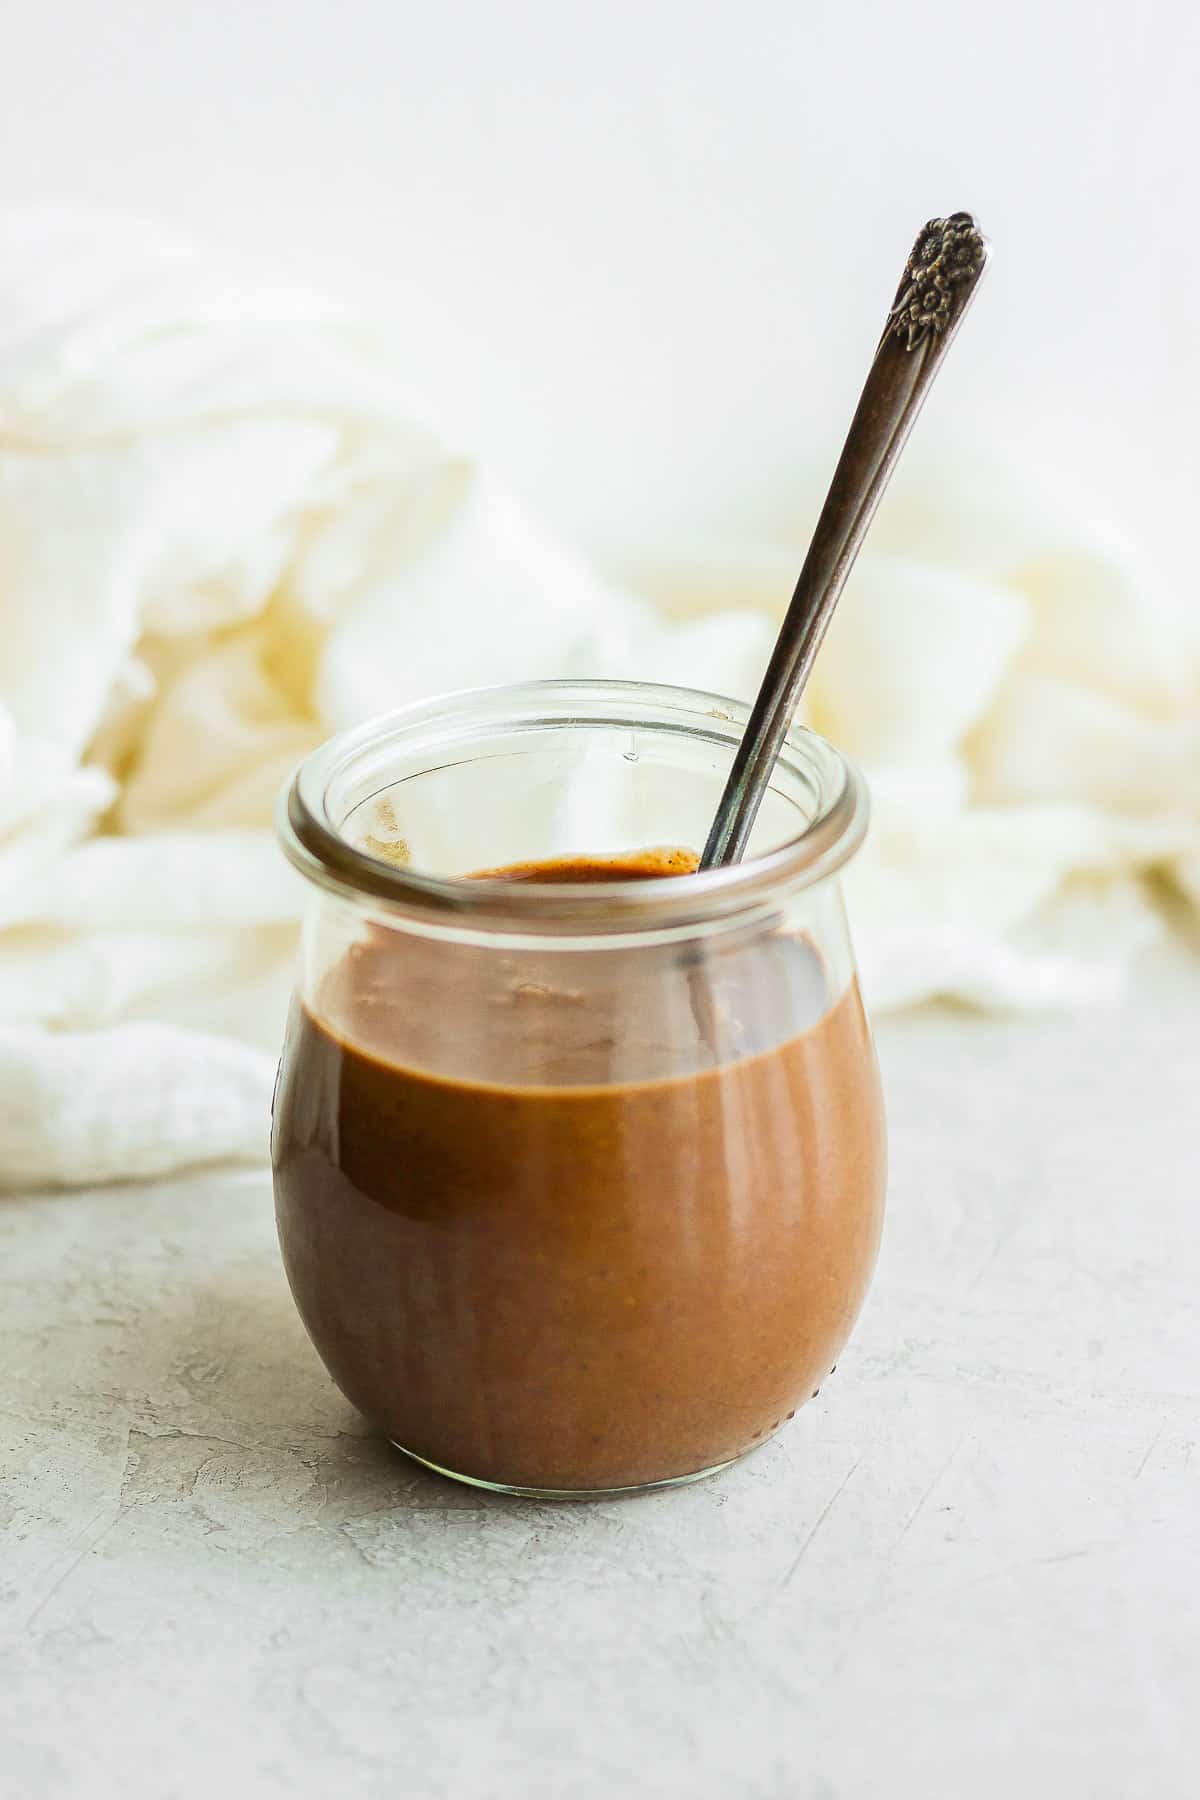 Homemade Nutella in glass jar with spoon insdie